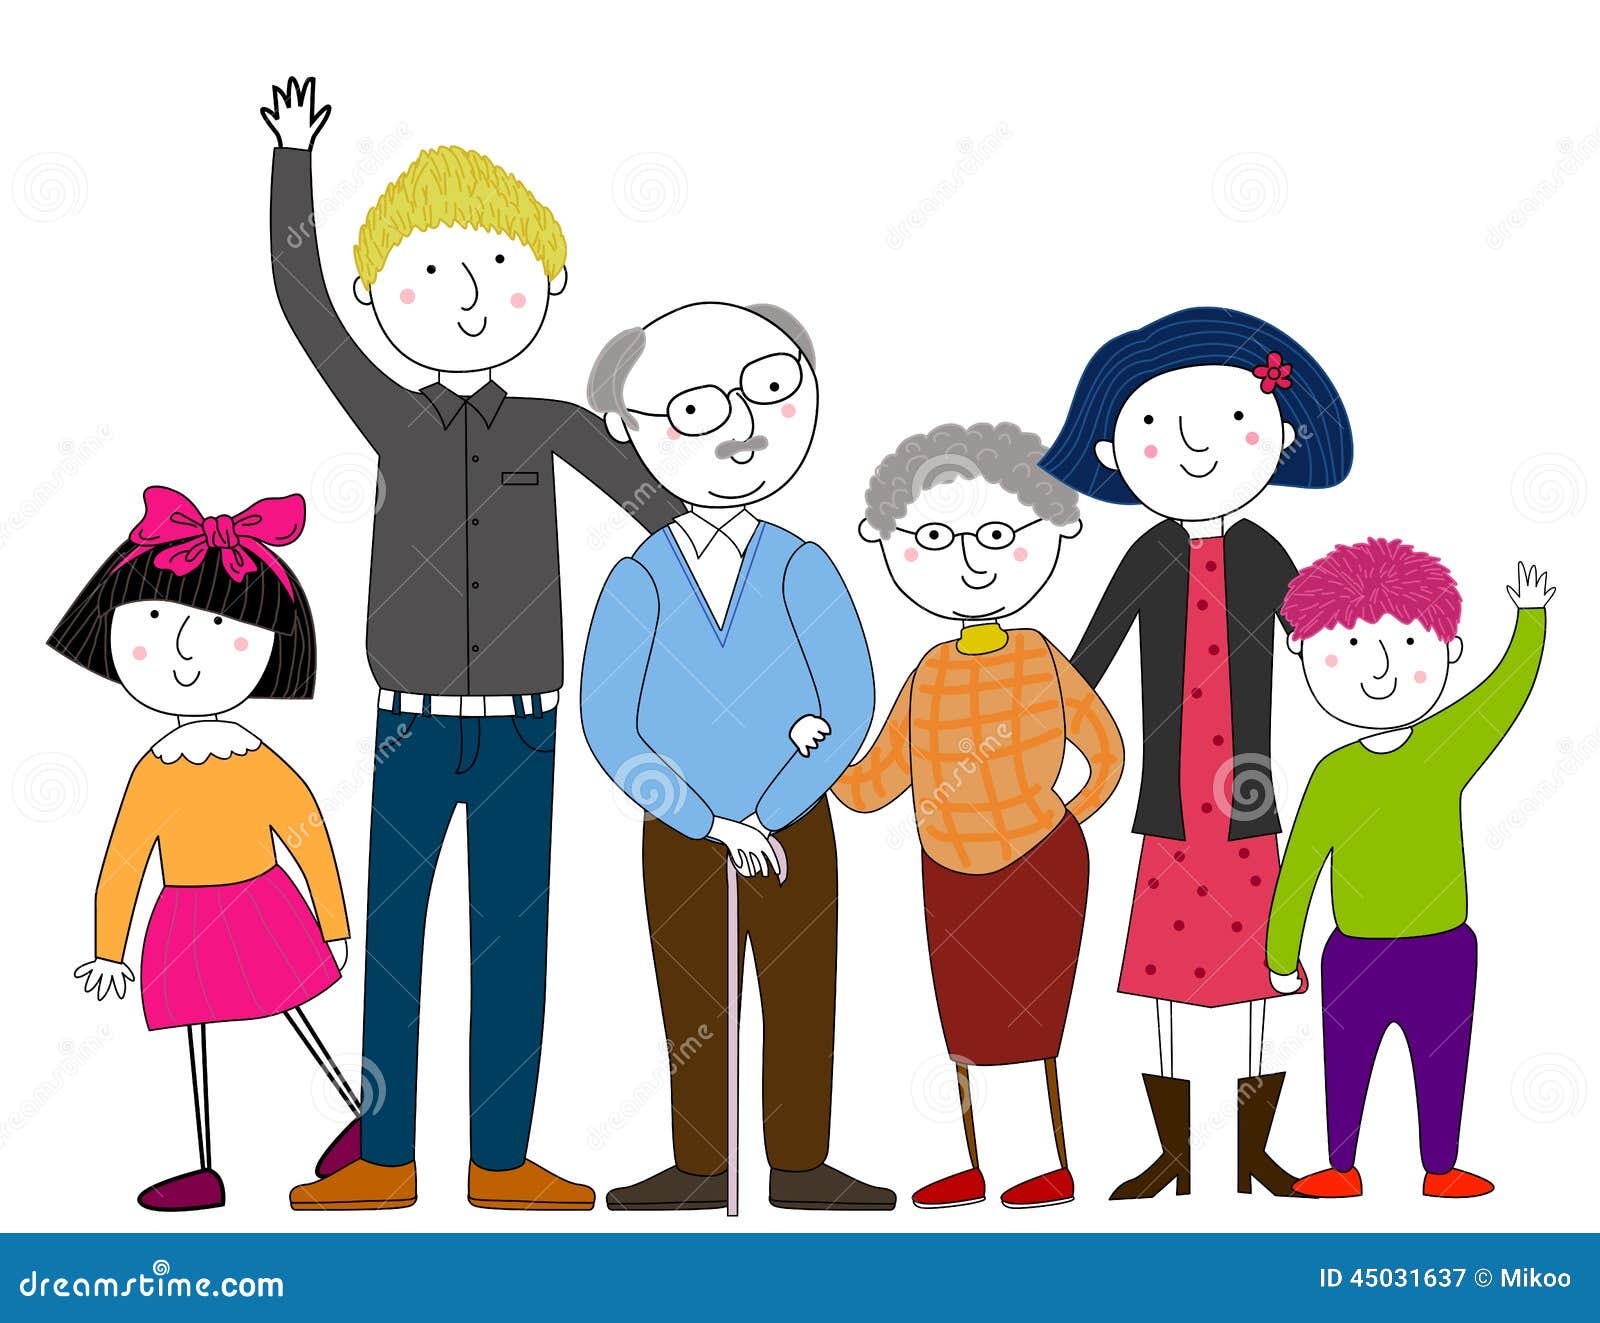 big family clipart images - photo #18